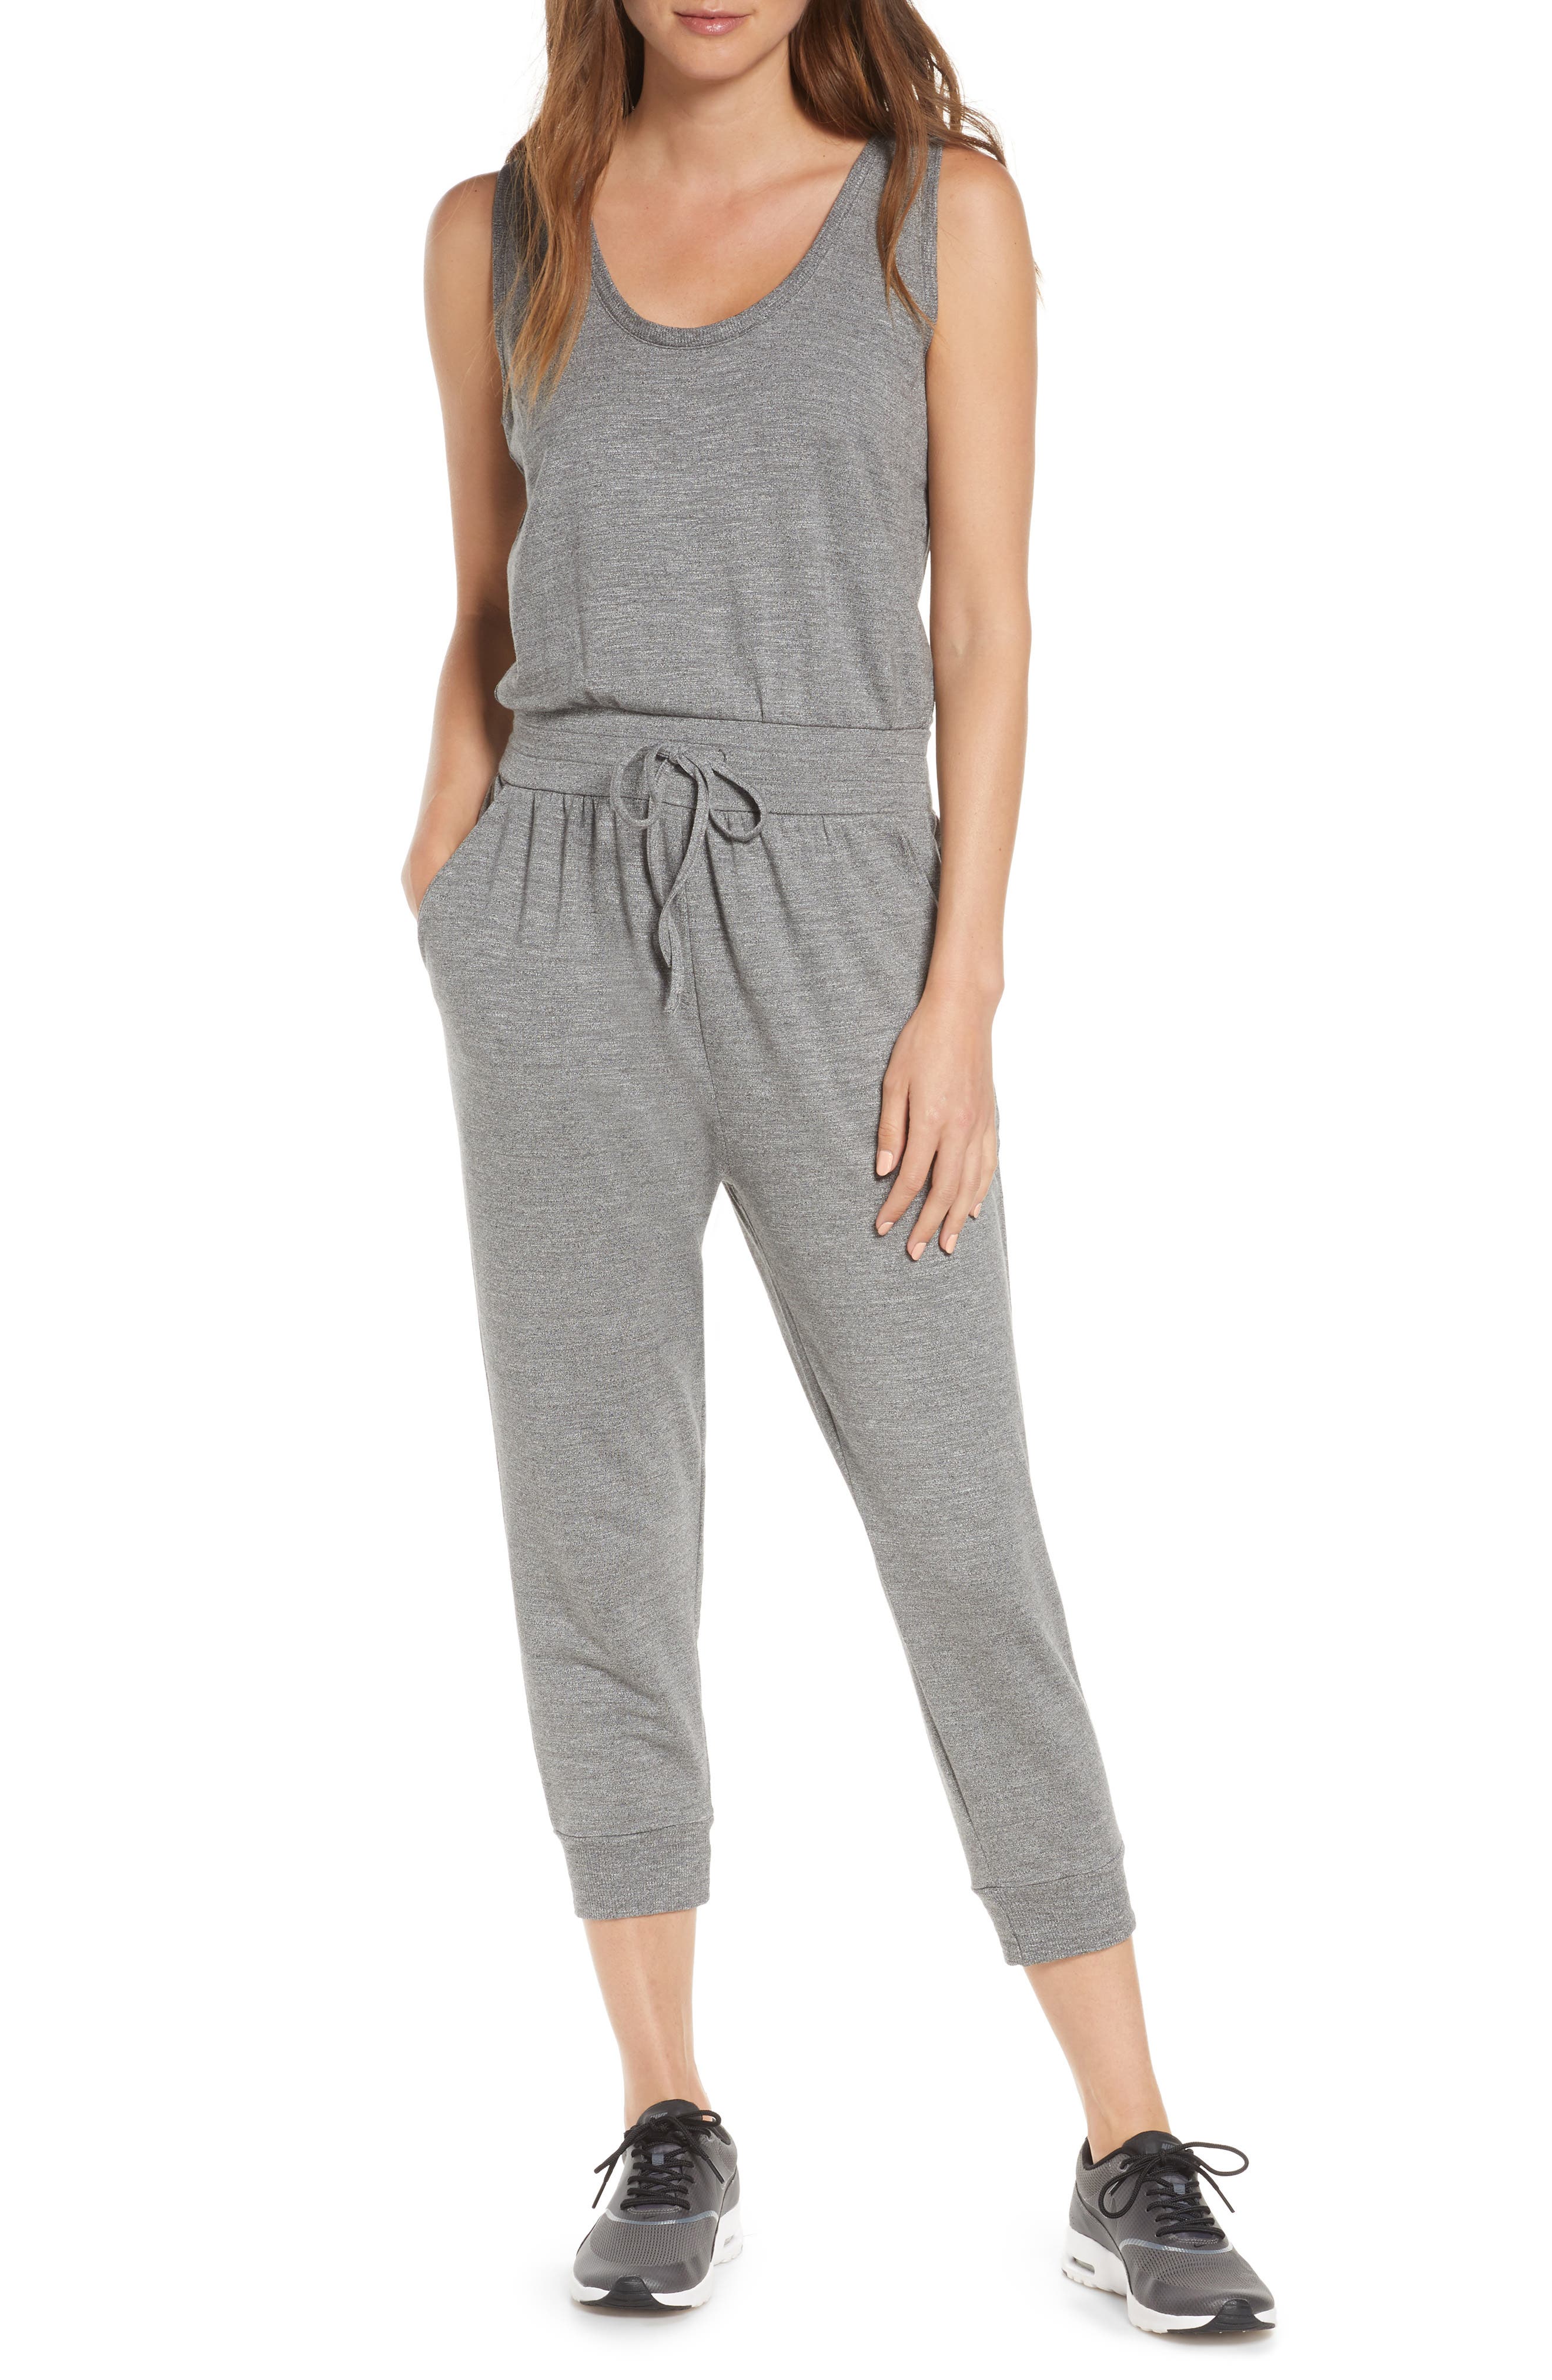 all in one jumpsuit for adults